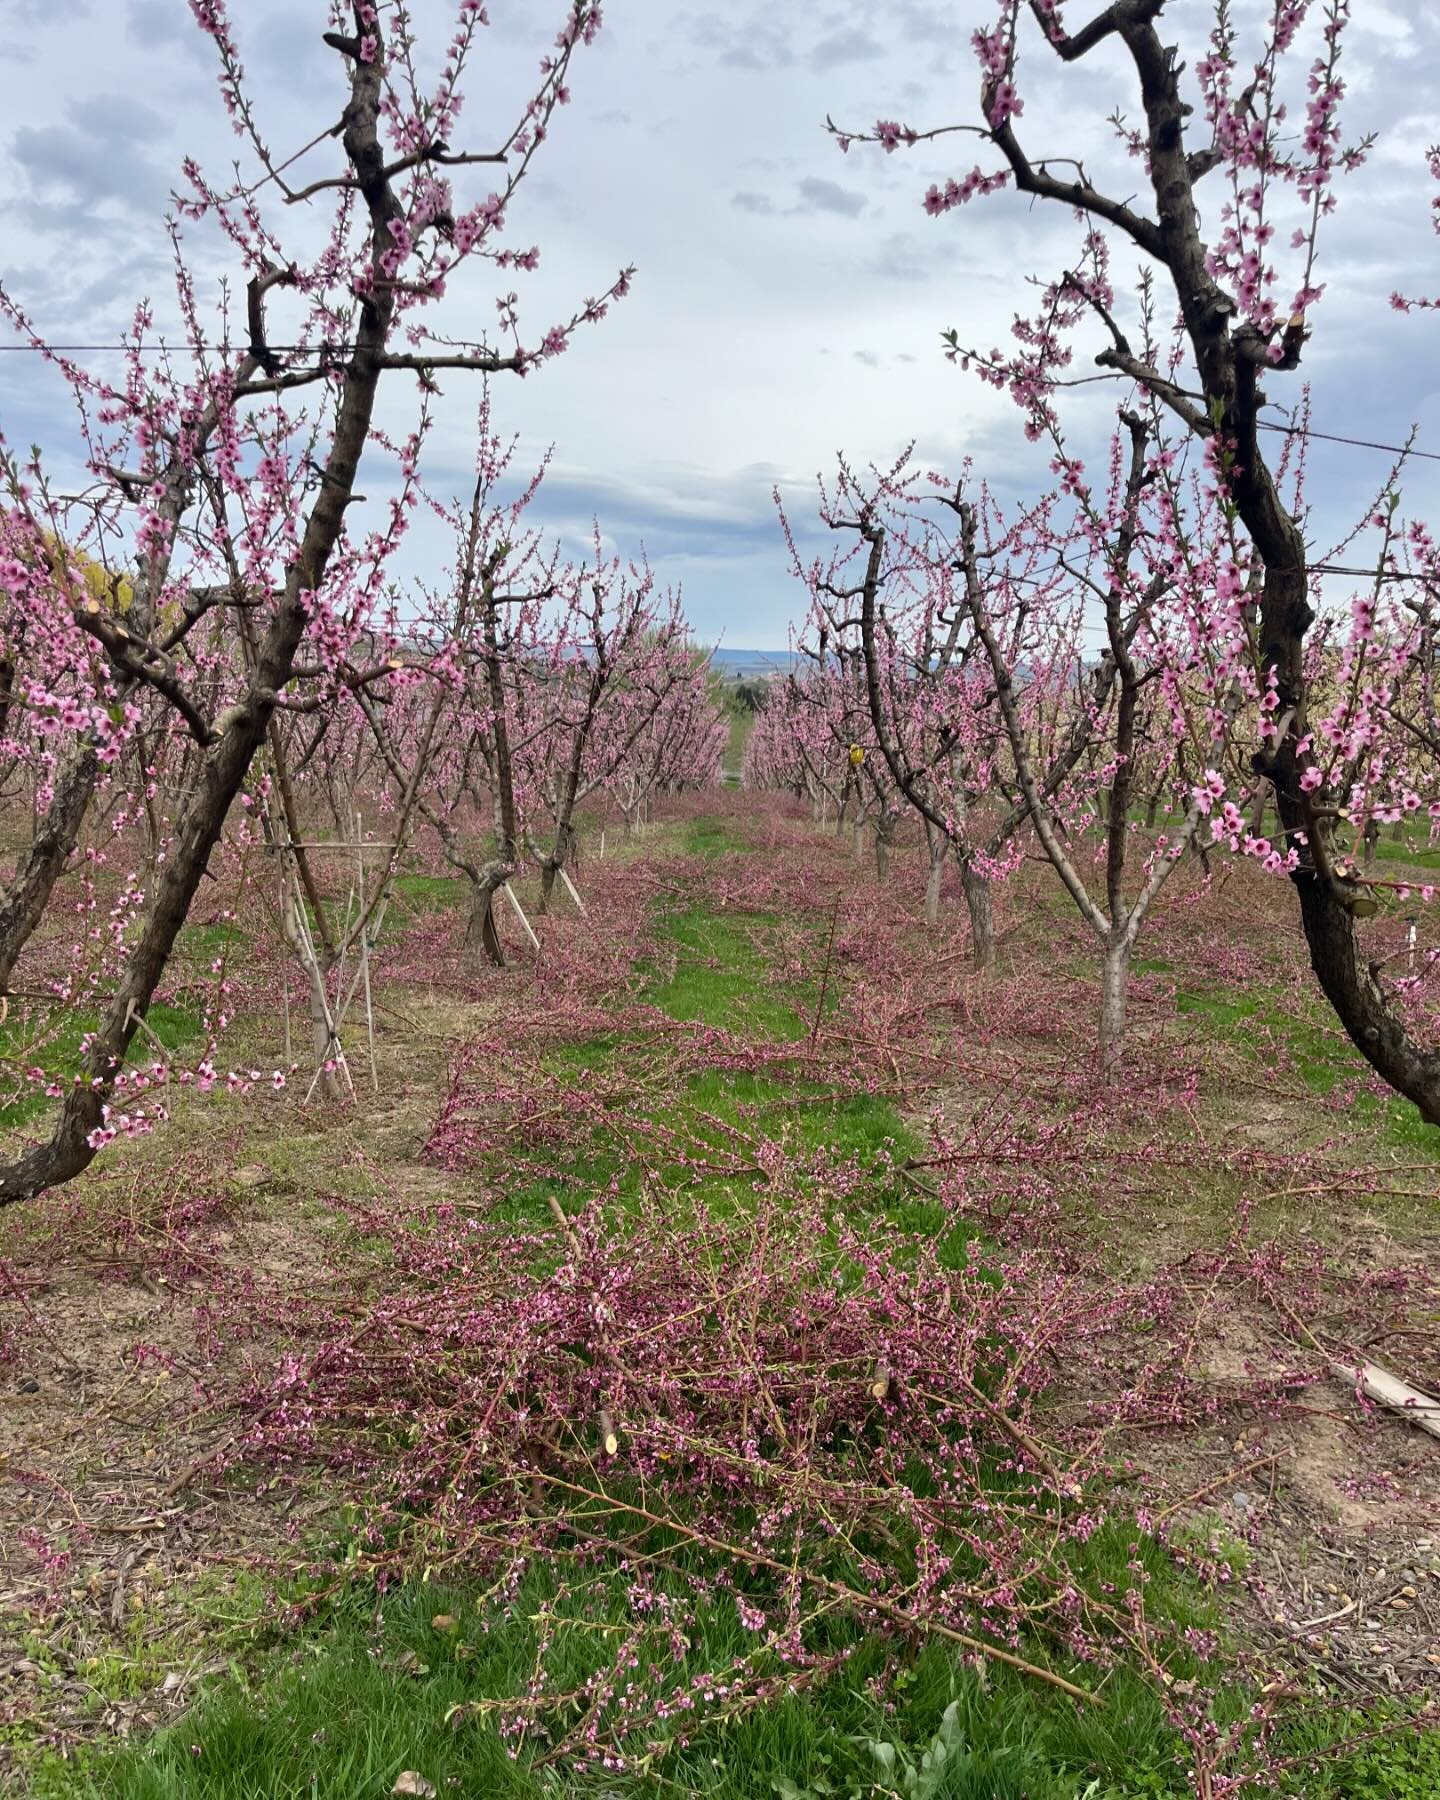 Getting some pruning done this week. 
Not a bad view with the orchard in bloom!